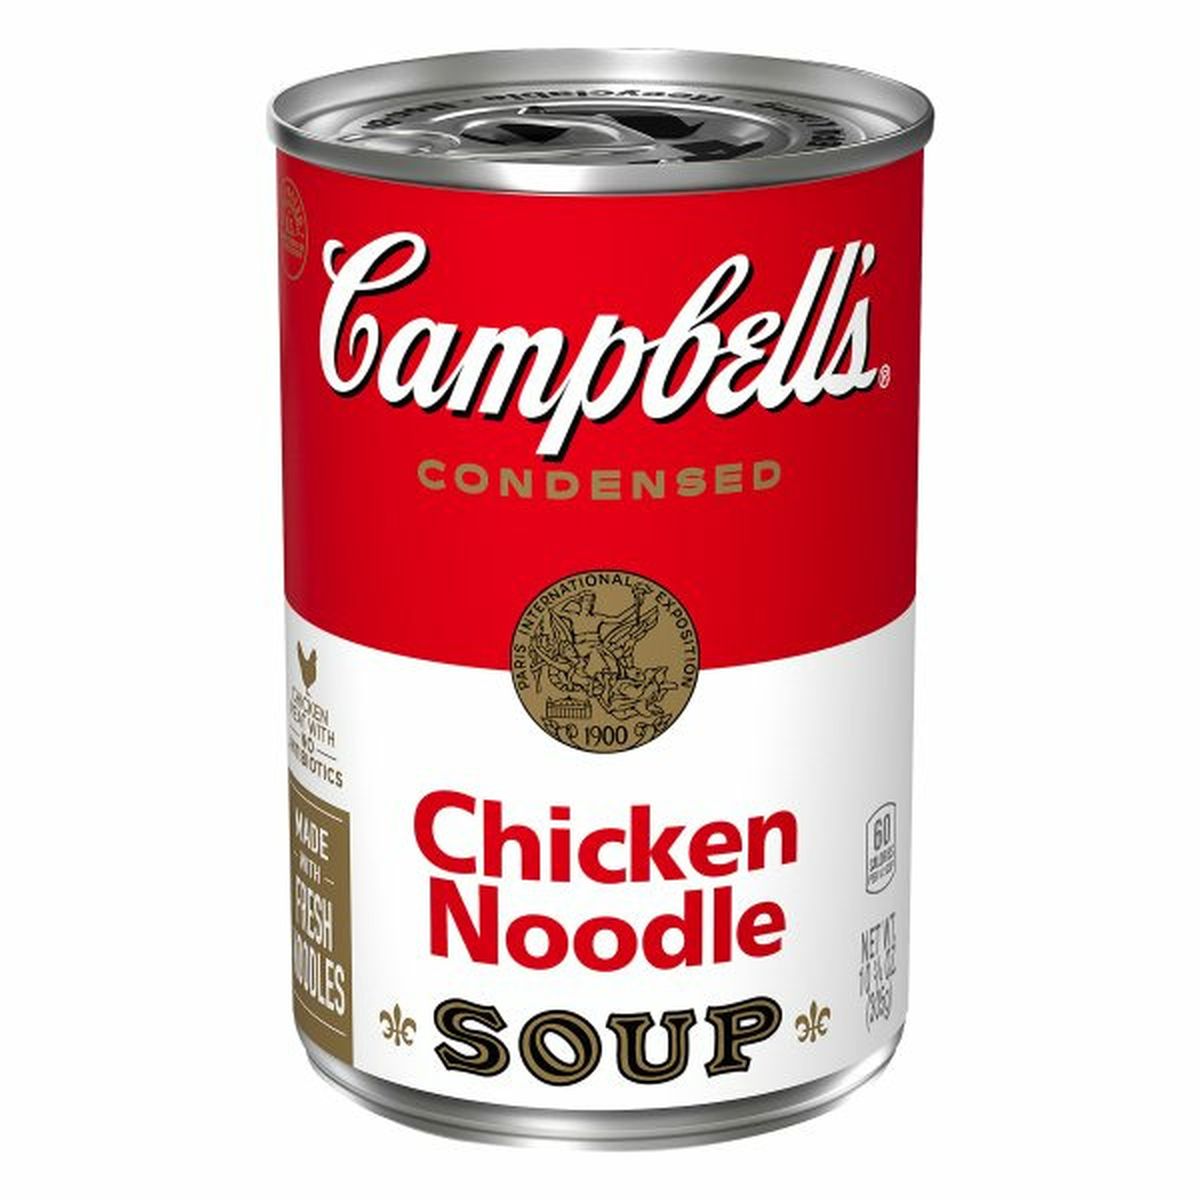 Calories in Campbell'ss Soup, Chicken Noodle, Condensed